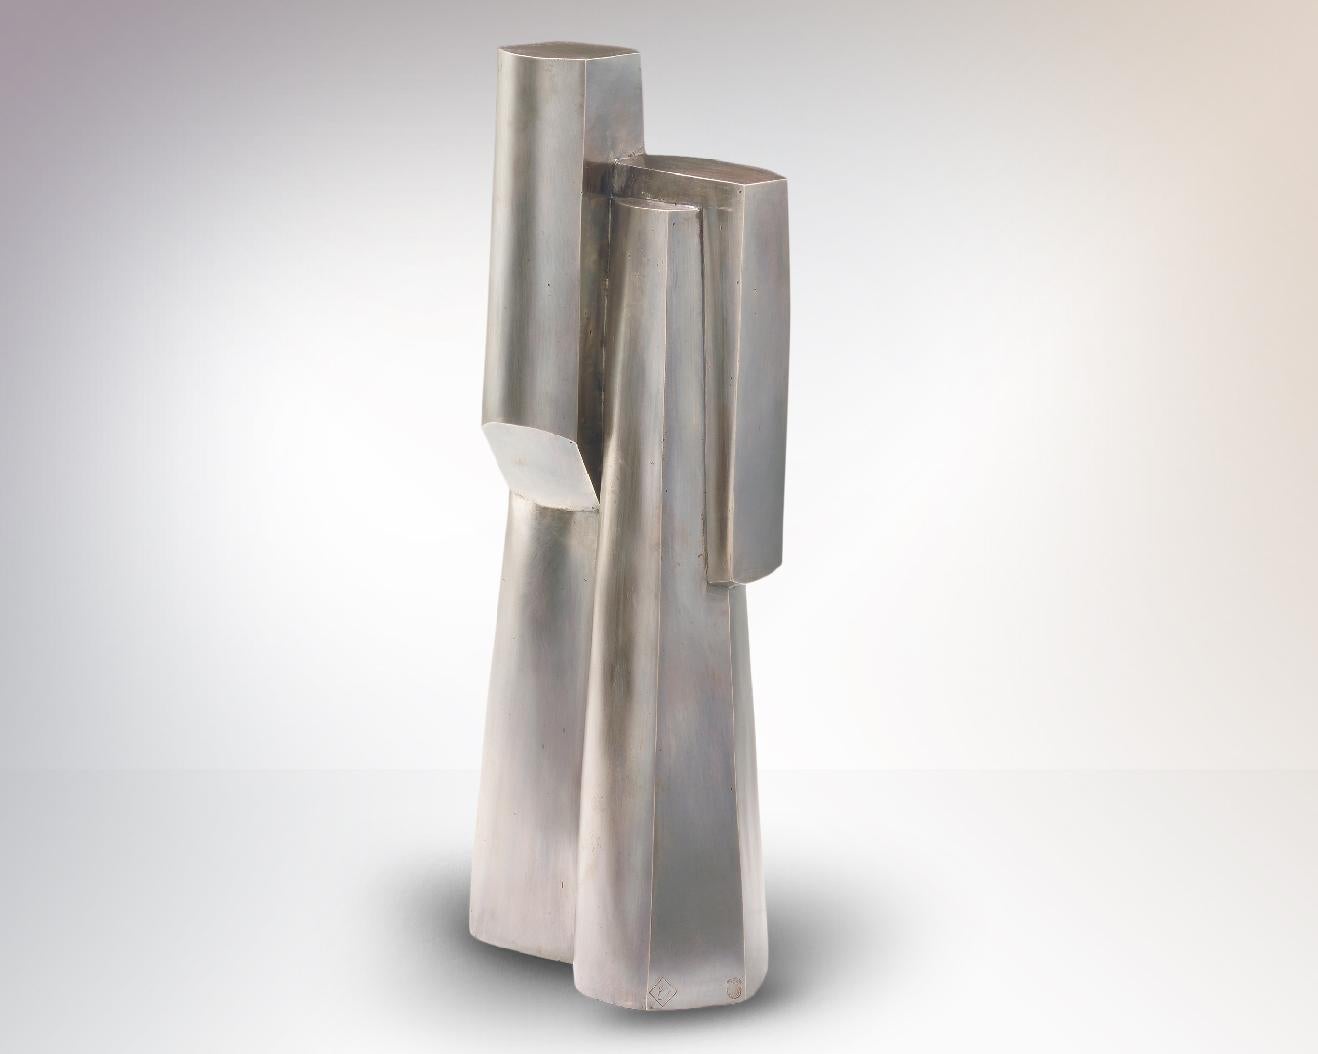 Abstract sculpture with beautiful curved lines.

German silver sculpture (alloy of copper, nickel and zinc)
Numbered and signed artwork
Limited edition 2/9
Measures: 47 x 15 x 20 cm.